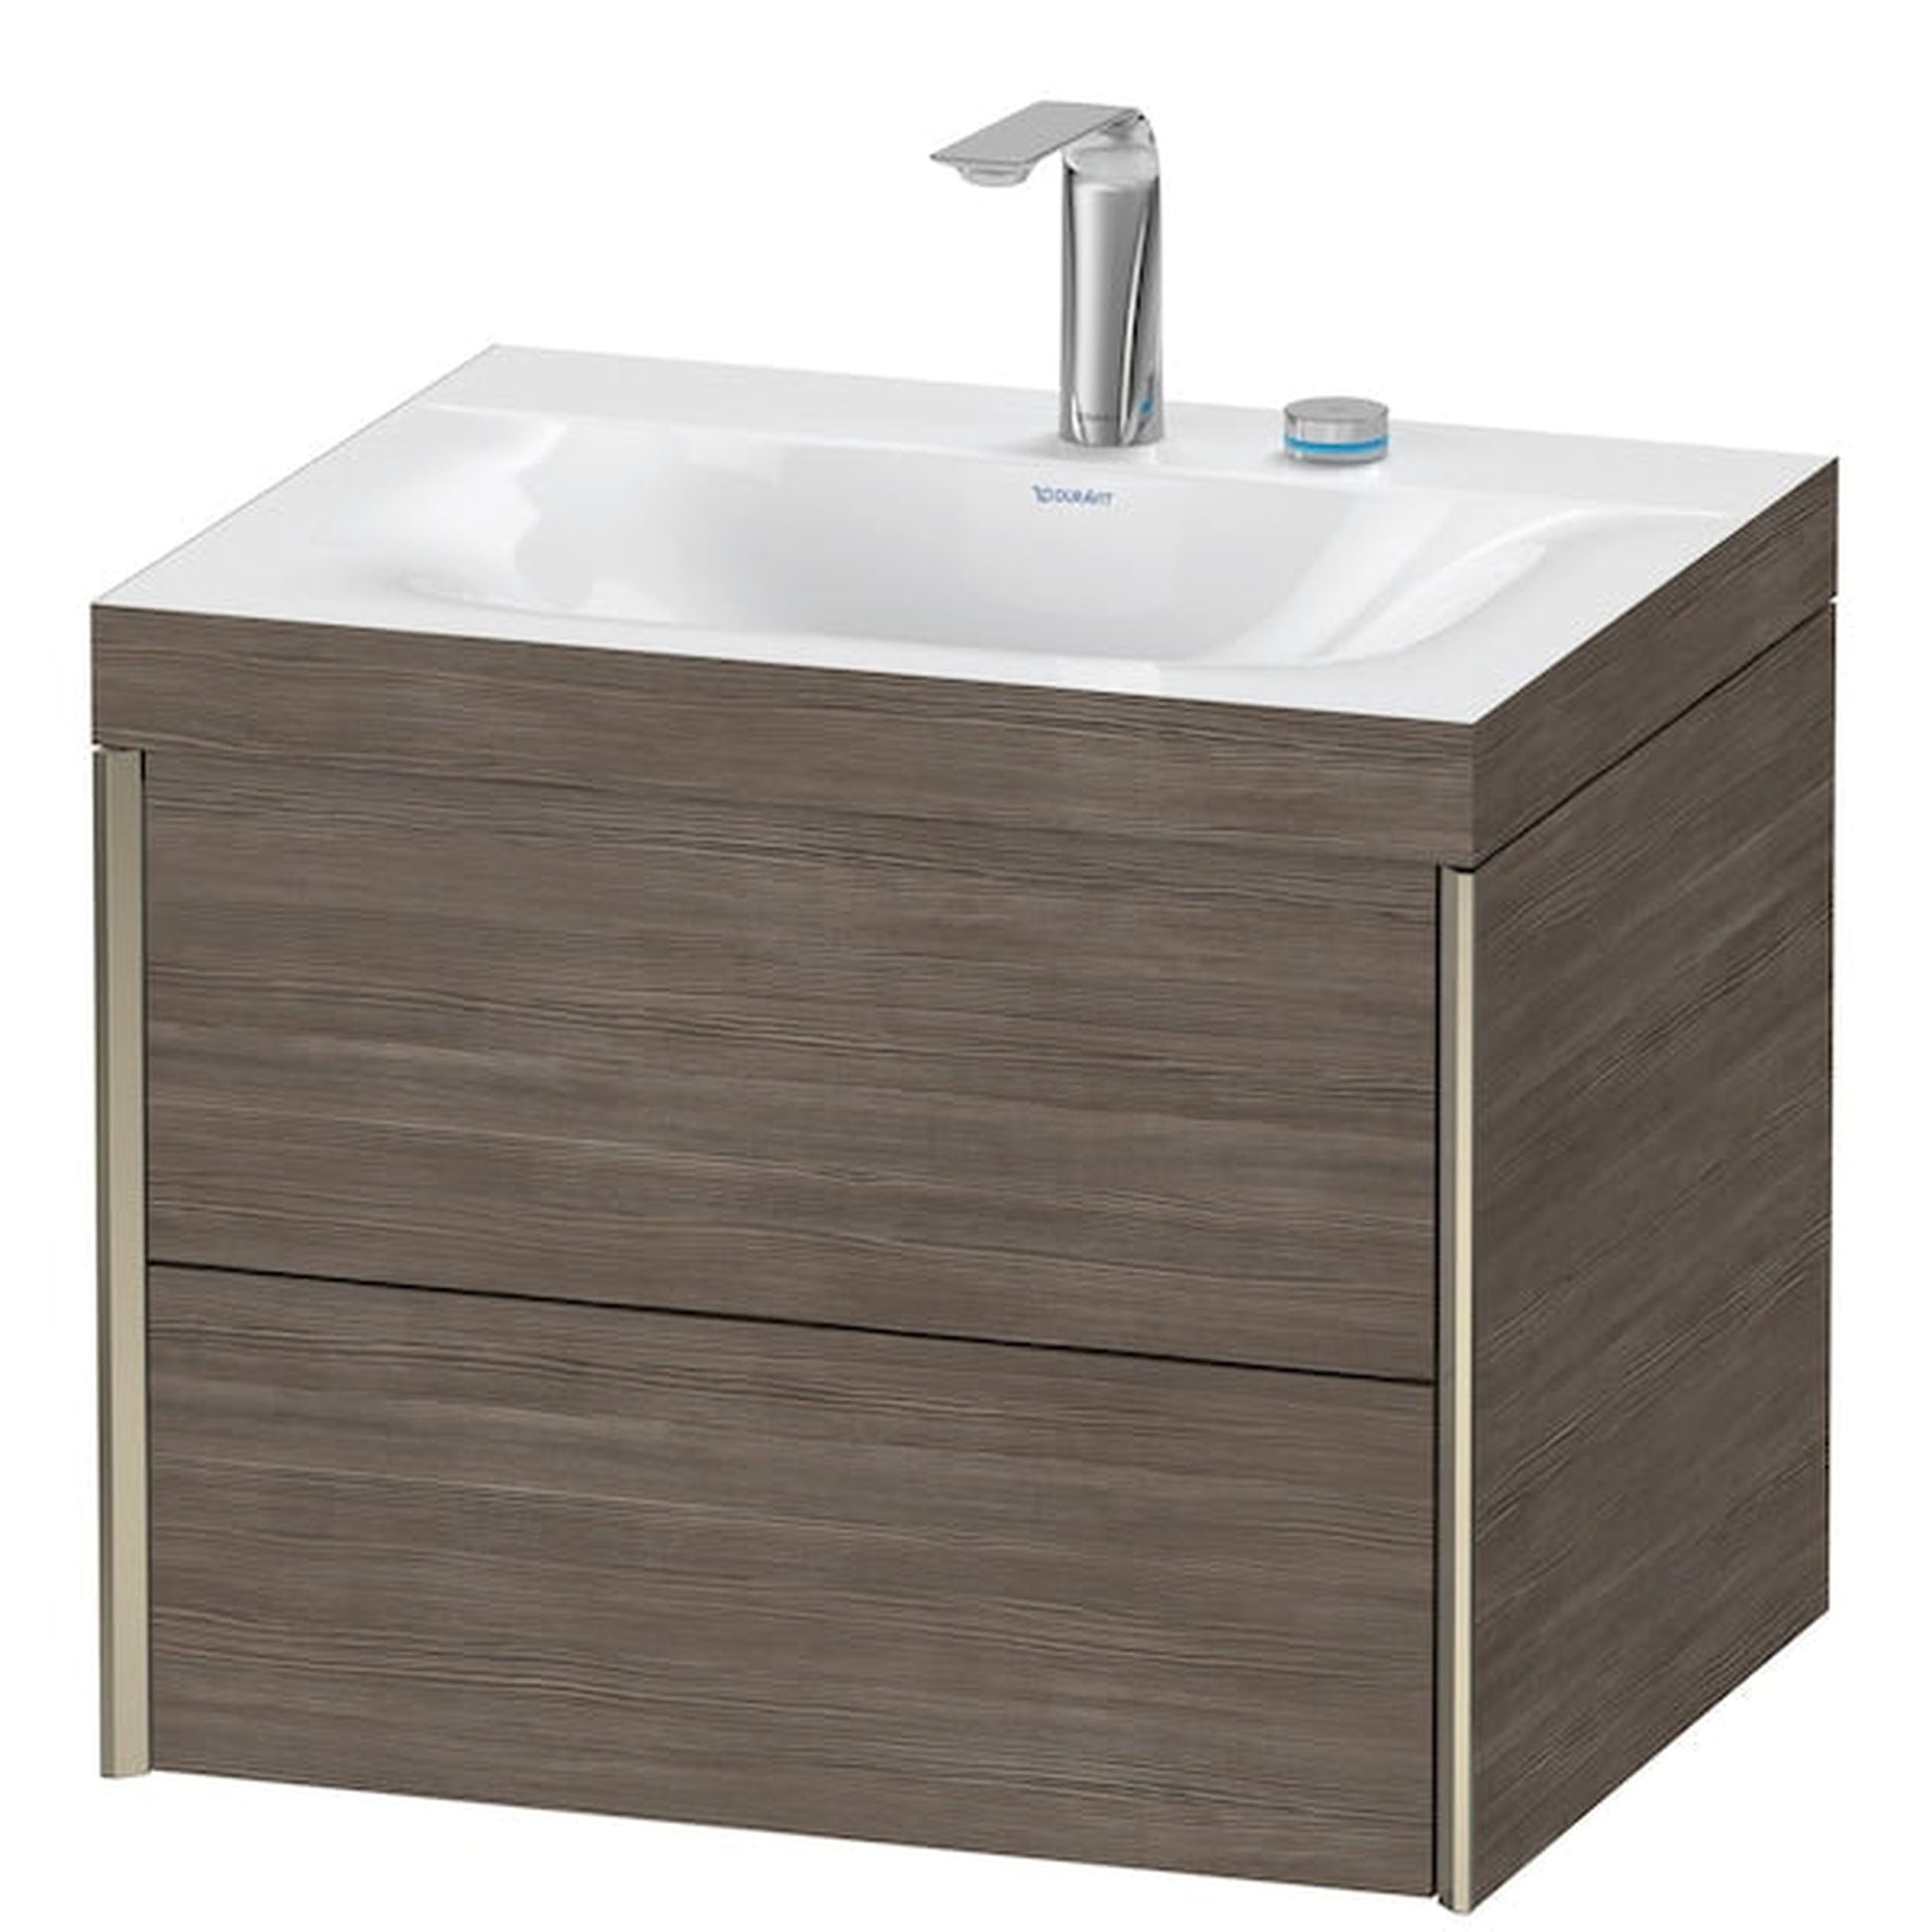 Duravit Xviu 24" x 20" x 19" Two Drawer C-Bonded Wall-Mount Vanity Kit With Two Tap Holes, Pine Terra (XV4614EB151C)